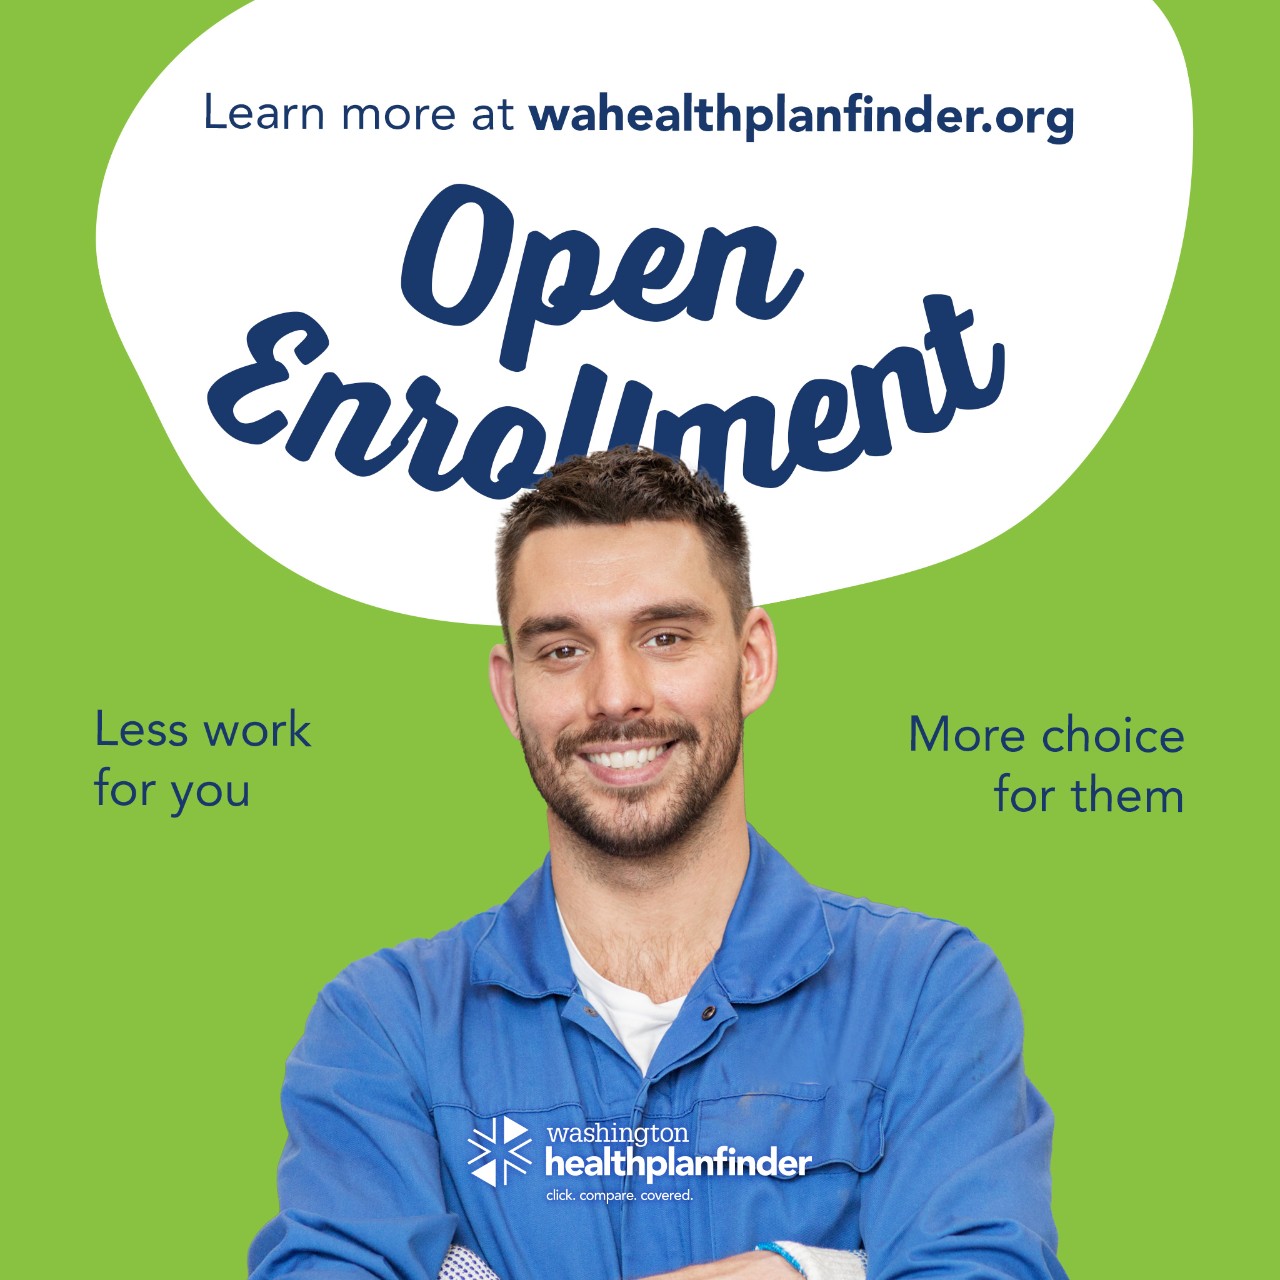 Learn more at wahealthplanfinder.org. Open Enrollment. Less work for you. More choice for them.